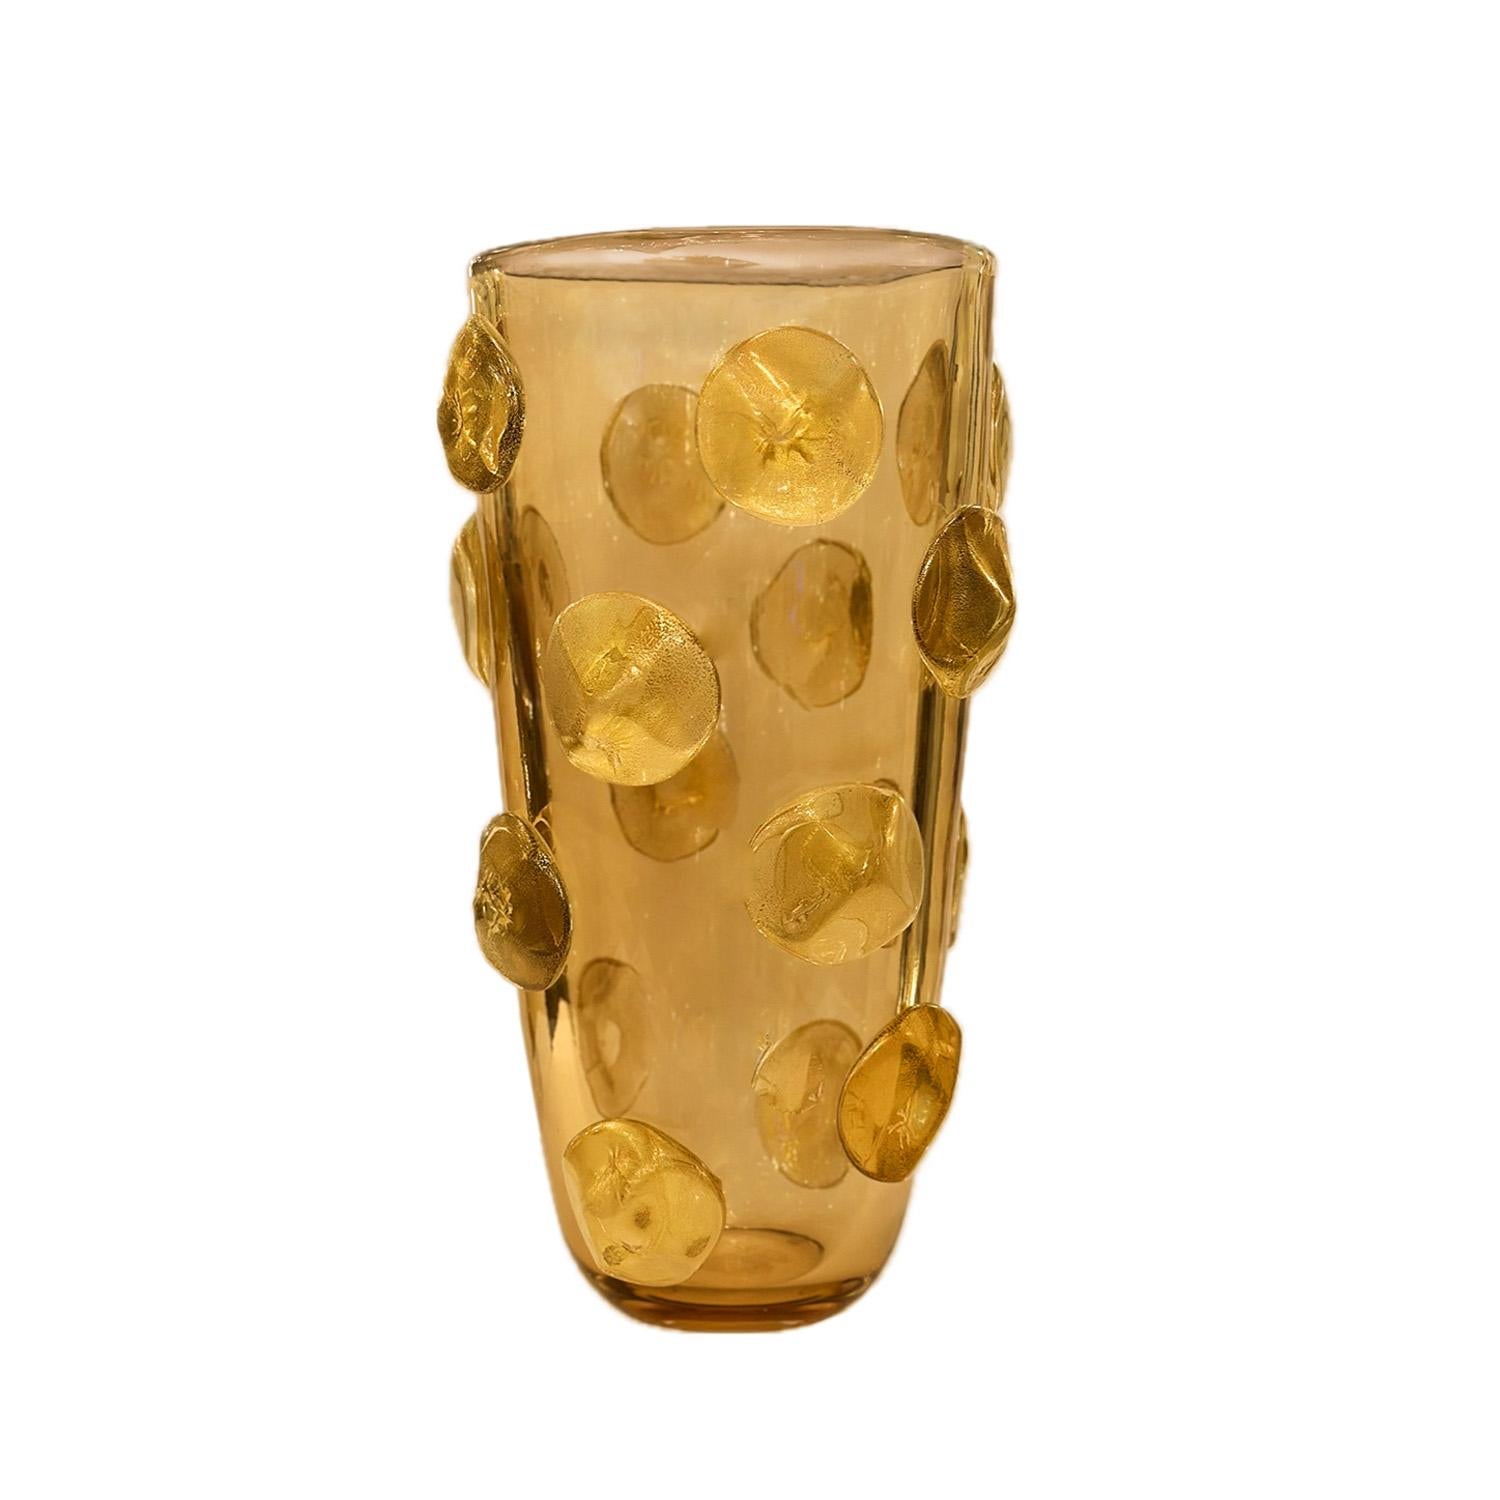 Tone on tone Topaz Murano glass vase decorated with applied dot design in Topaz glass with gold leaf inclusions.  Italy 2023.

This vase is currently available in our NYC showroom. It is also available in Blue and Emerald Green glass with gold leaf